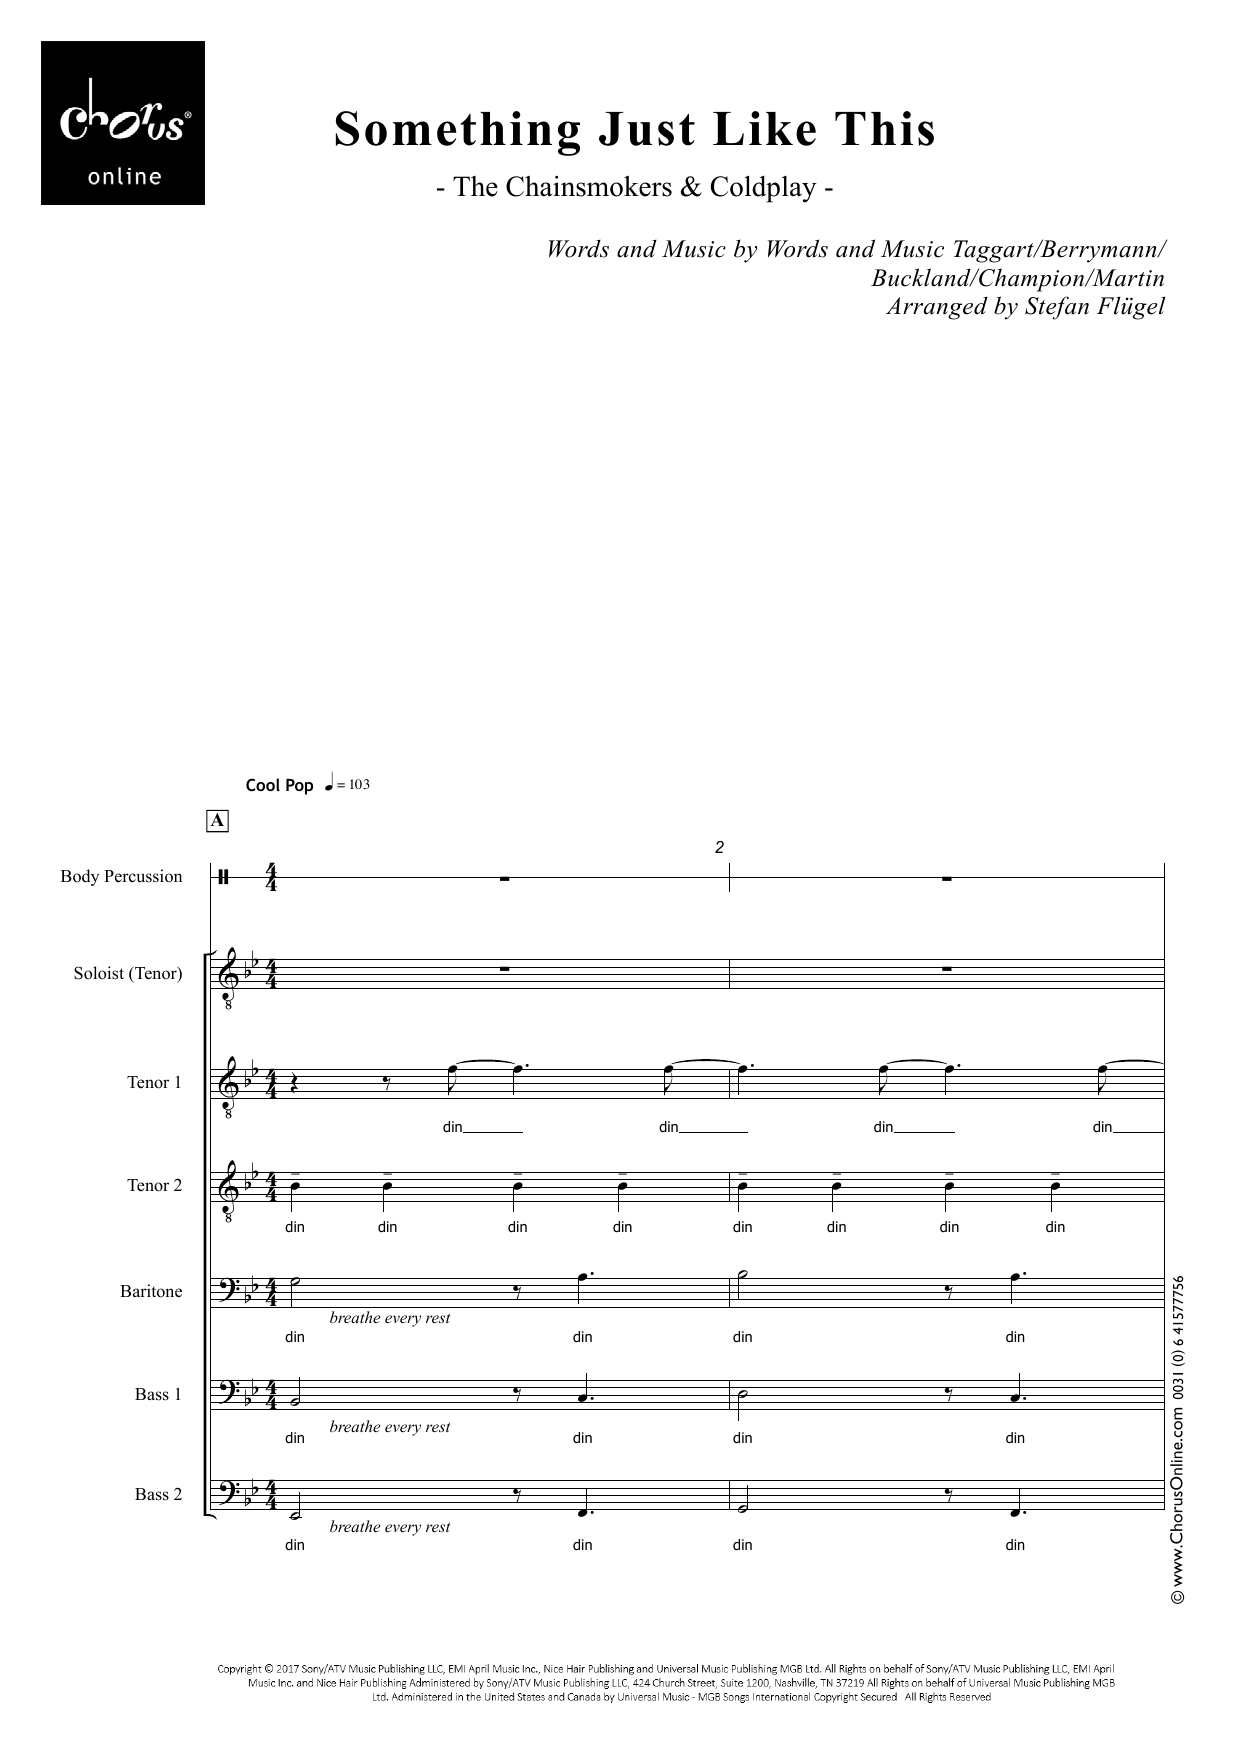 The Chainsmokers & Coldplay Something Just Like This (arr. Stefan Flügel) sheet music notes printable PDF score